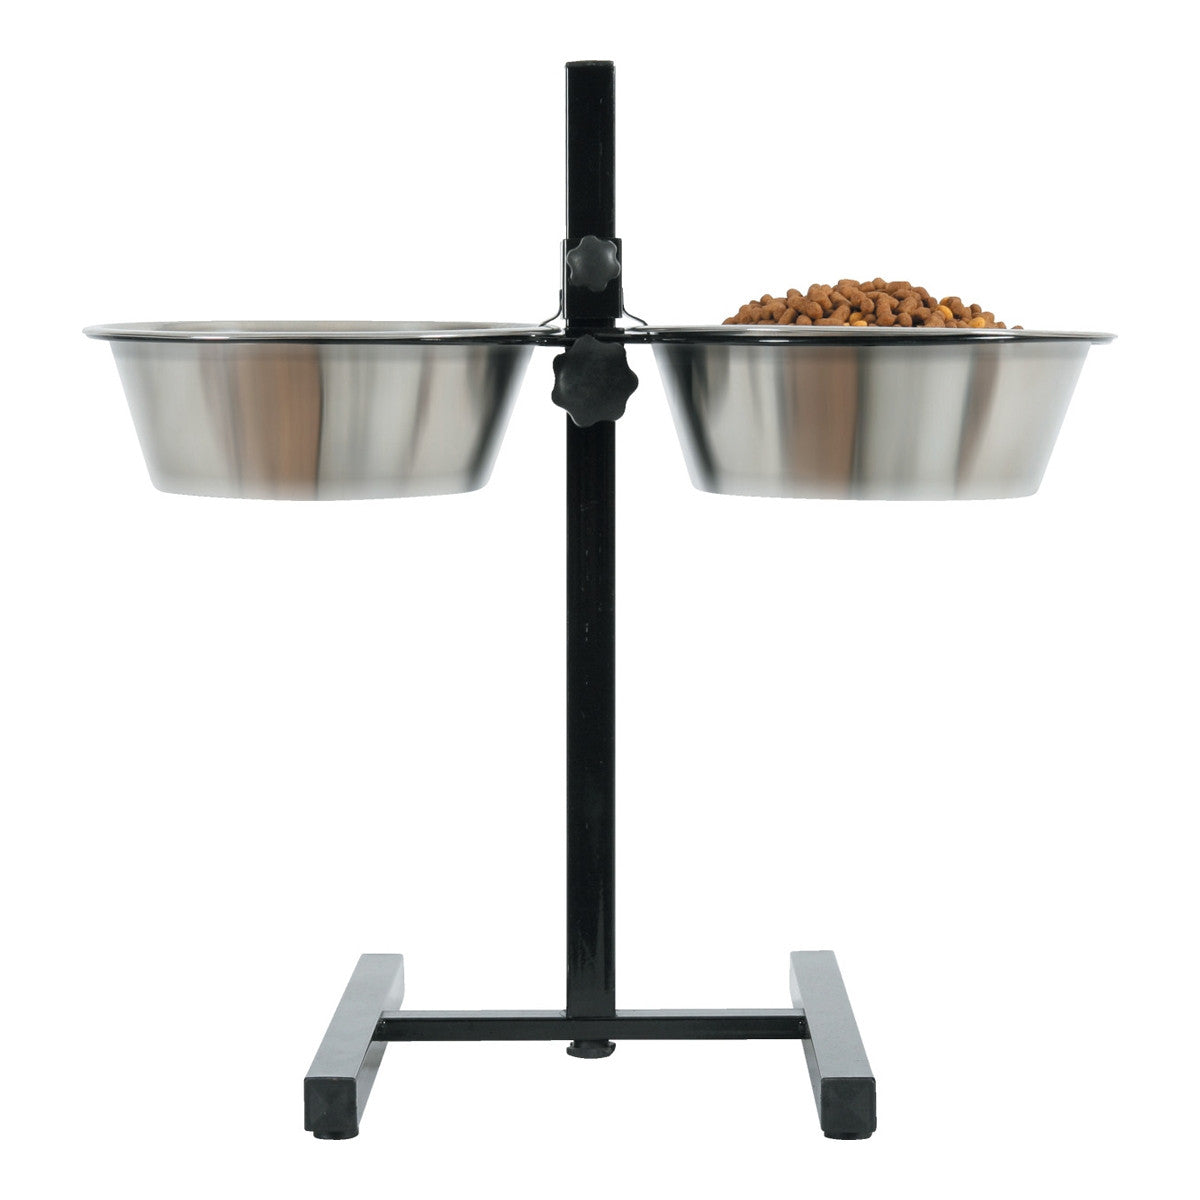 ZOLUX Adjustable Stand with Stainless Steel Bowls (2.5L)